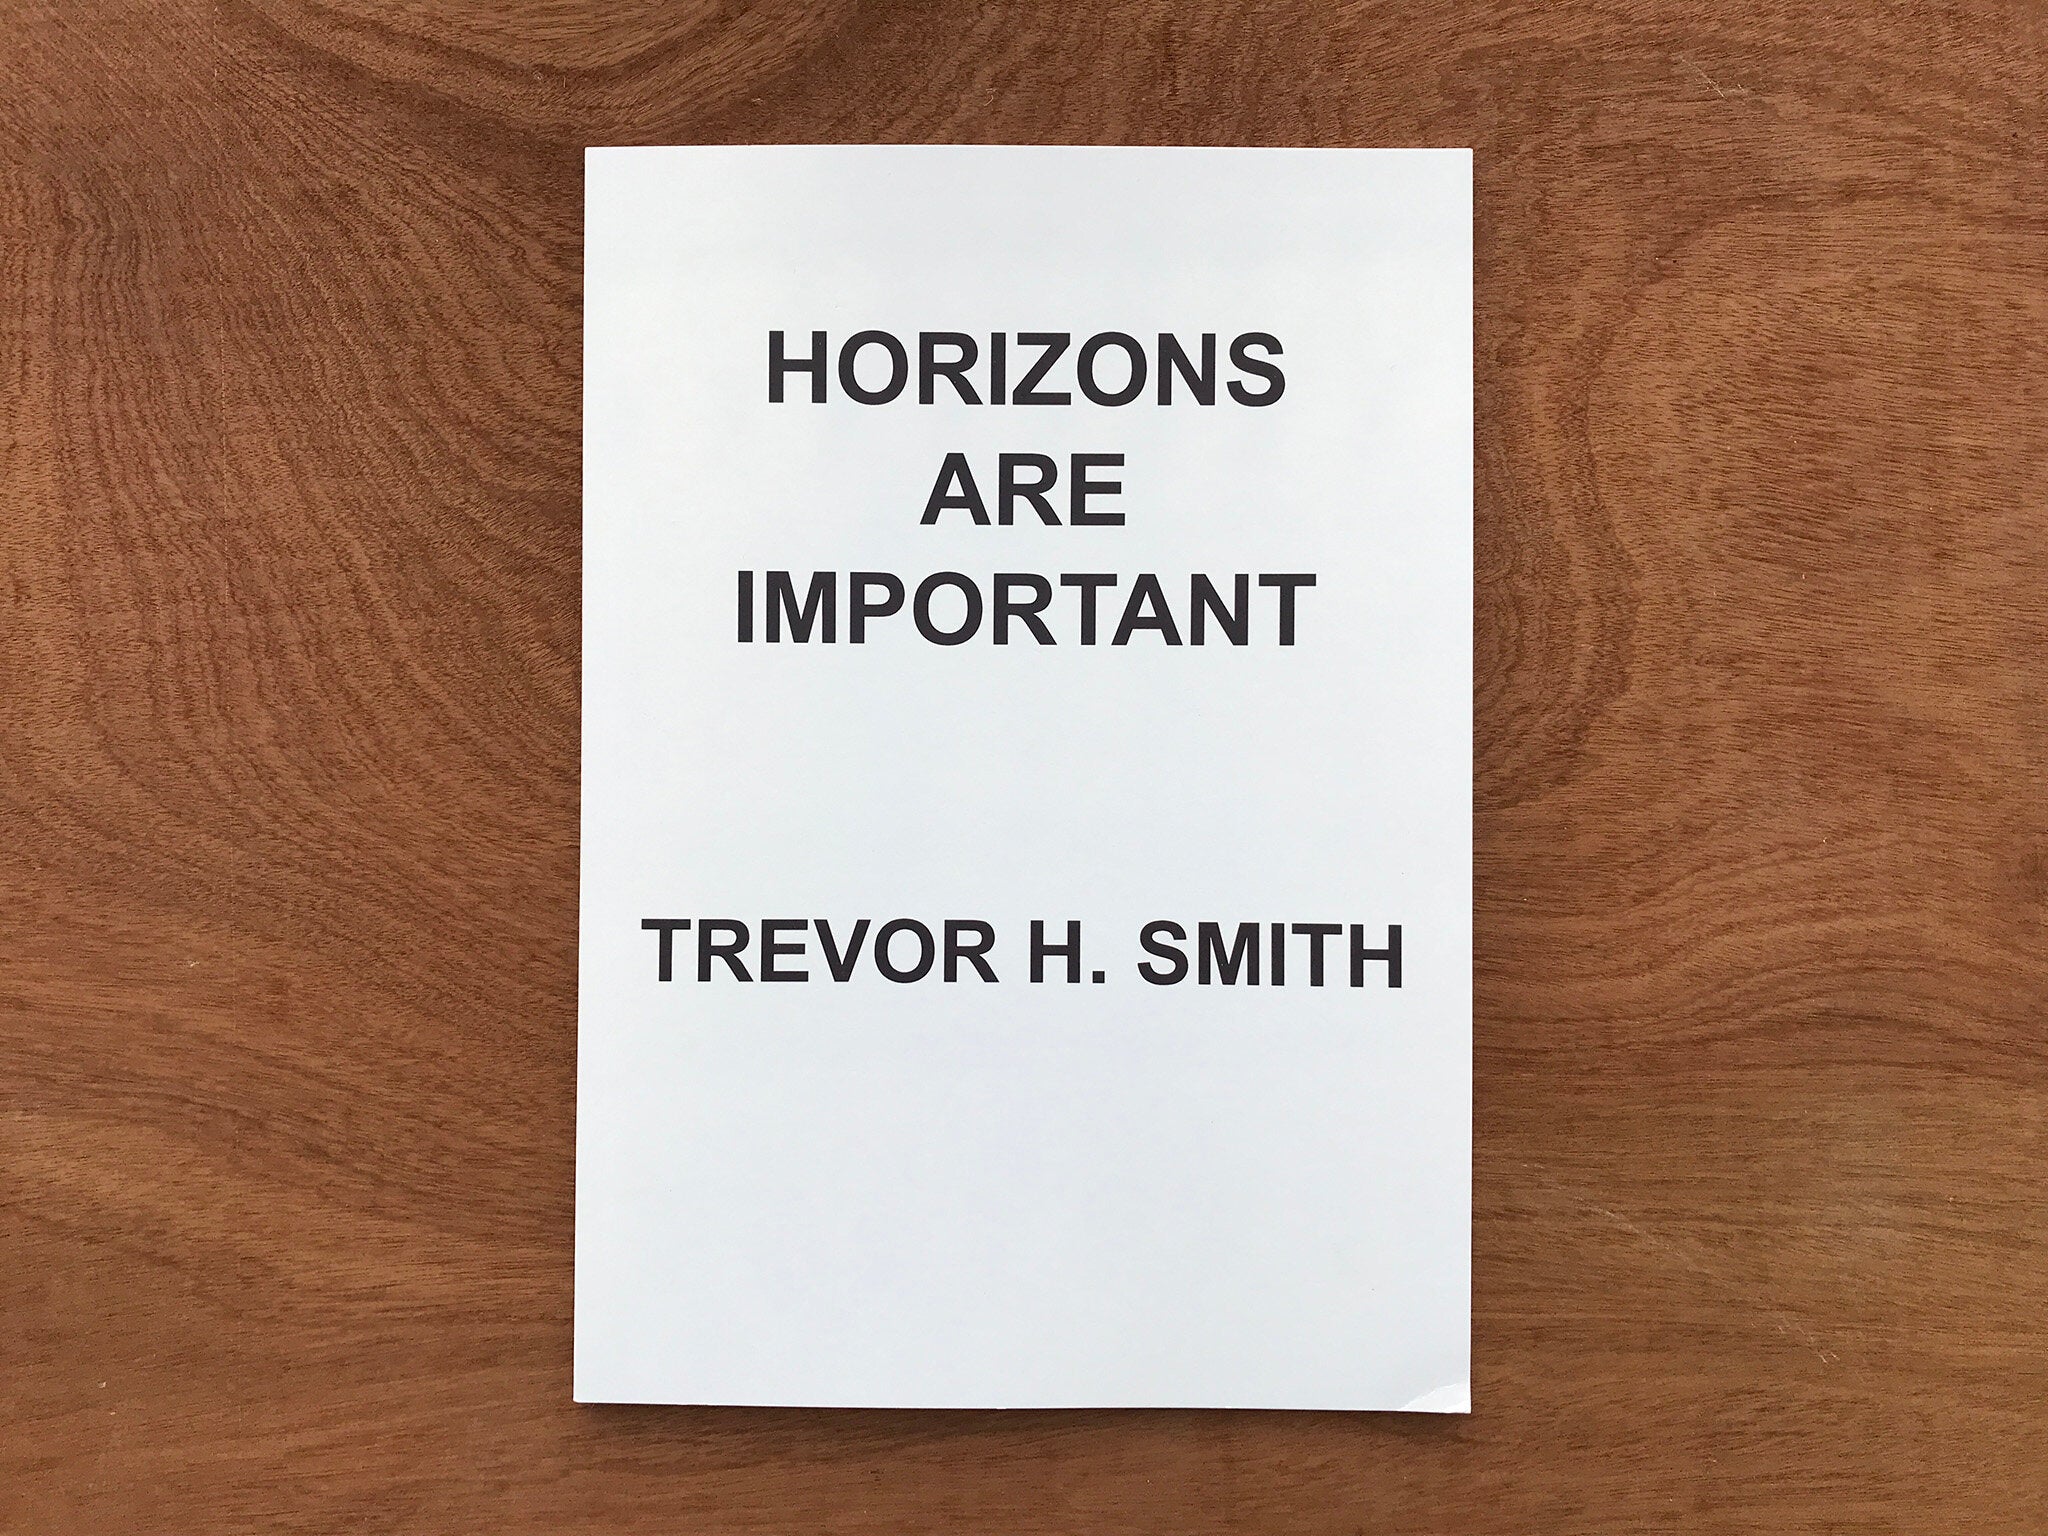 HORIZONS ARE IMPORTANT by Trevor H. Smith